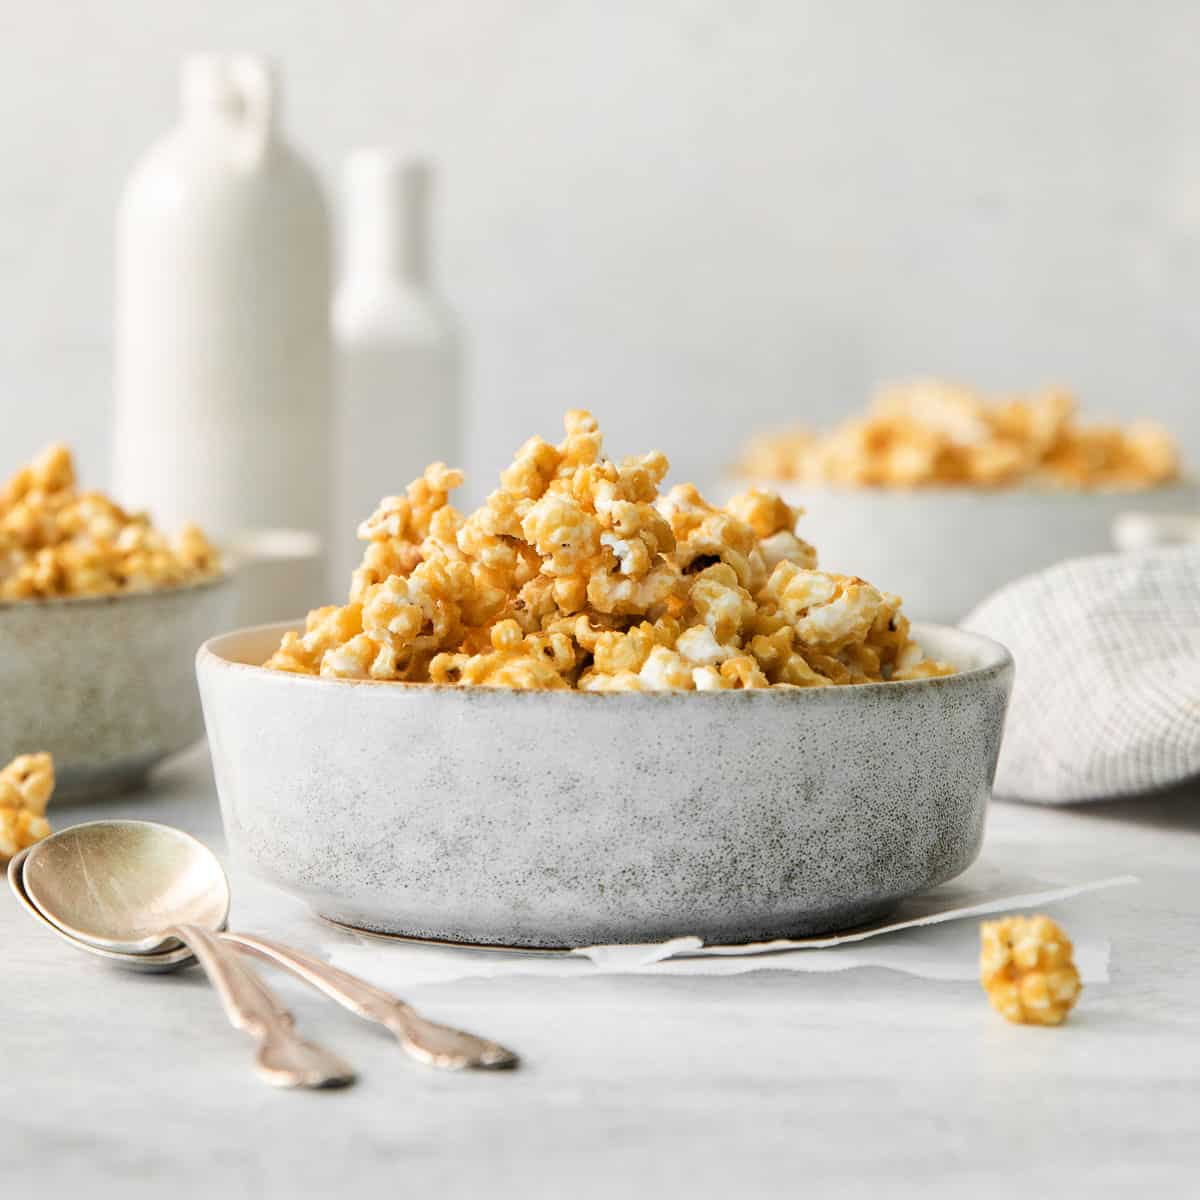 Microwave caramel corn in a bowl on a countertop, with bowls of popcorn and jars of milk in the background